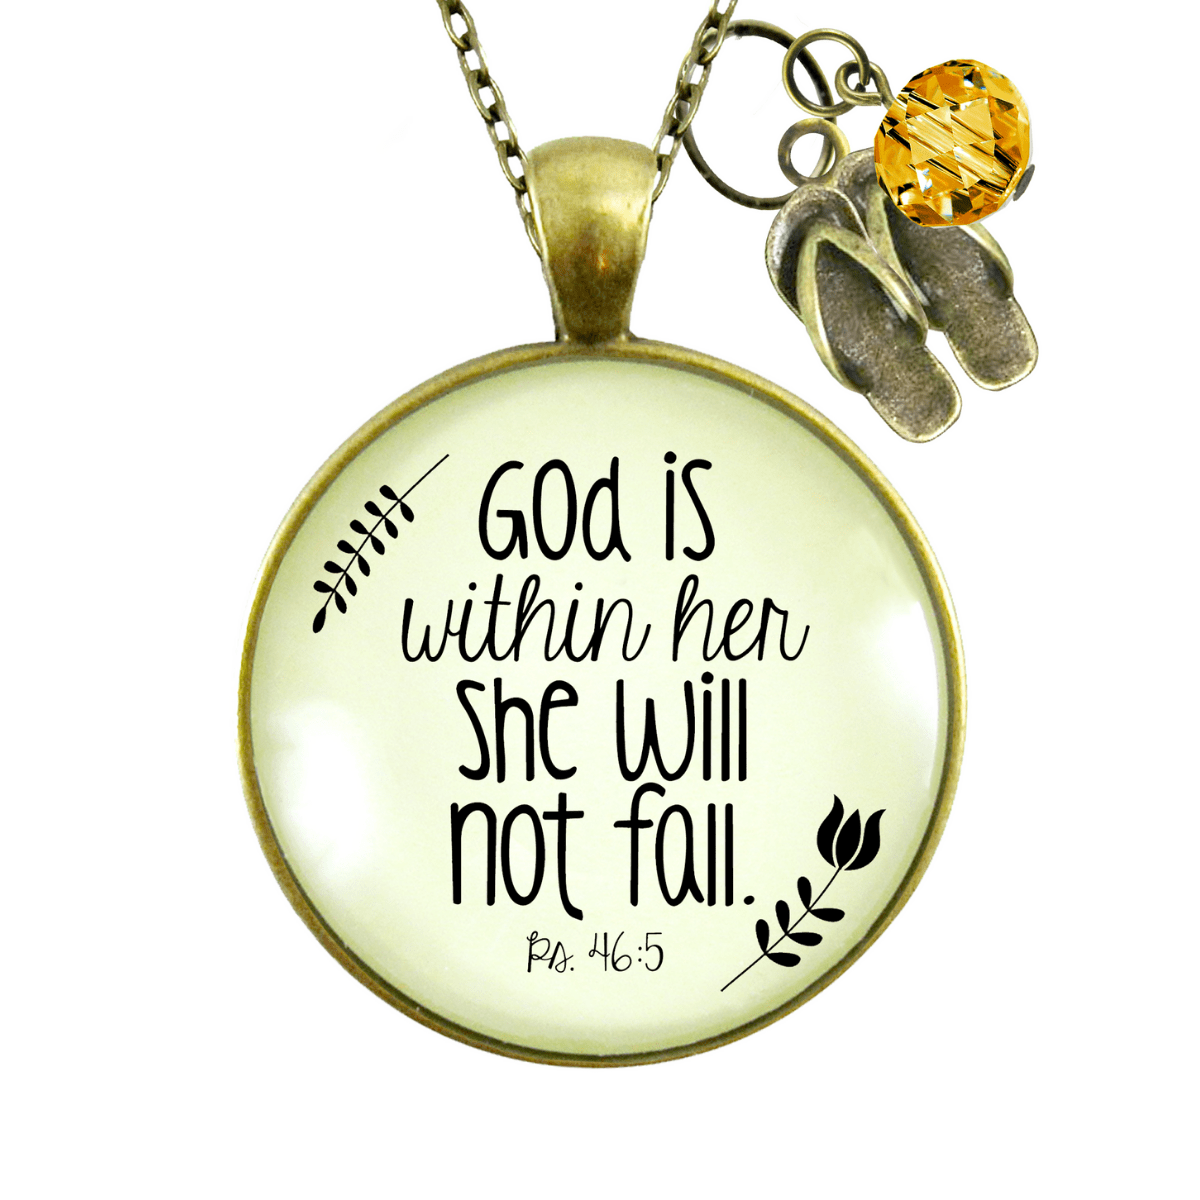 Gutsy Goodness God is Within Her Necklace Faith Psalm Trendy Jewelry Flip Flop Charm - Gutsy Goodness Handmade Jewelry;God Is Within Her Necklace Faith Psalm Trendy Jewelry Flip Flop Charm - Gutsy Goodness Handmade Jewelry Gifts